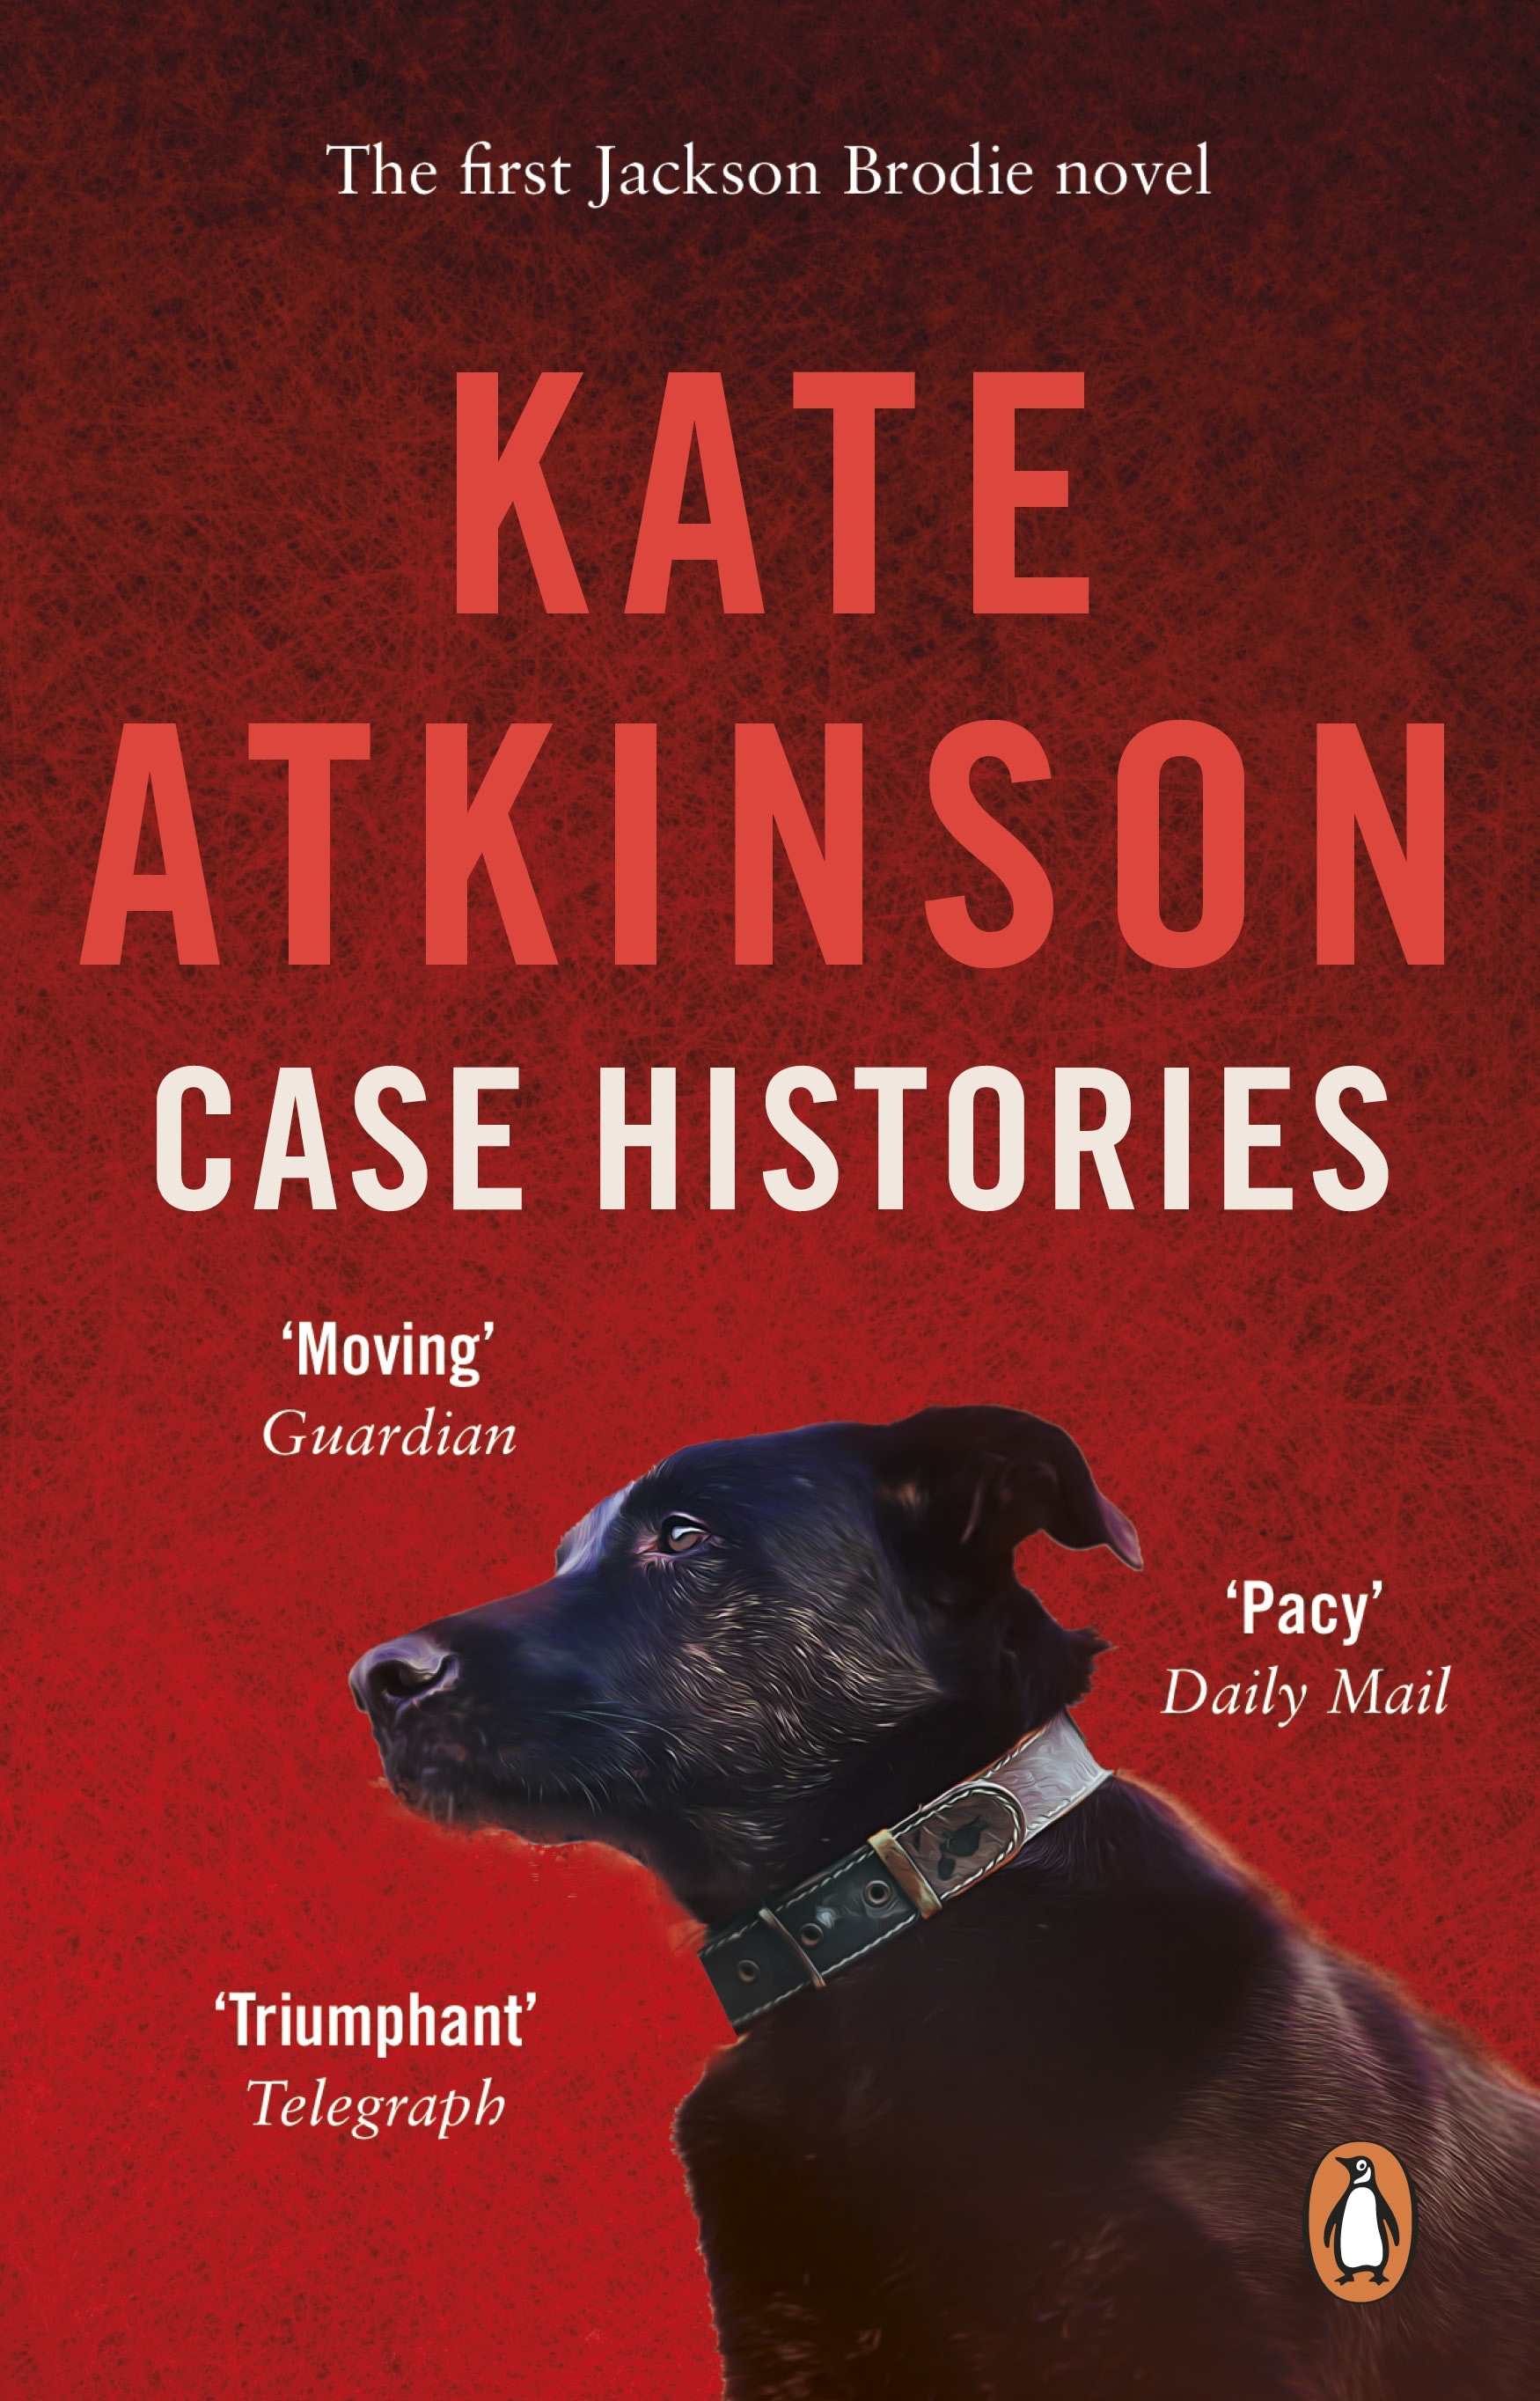 Book “Case Histories” by Kate Atkinson — June 1, 2005